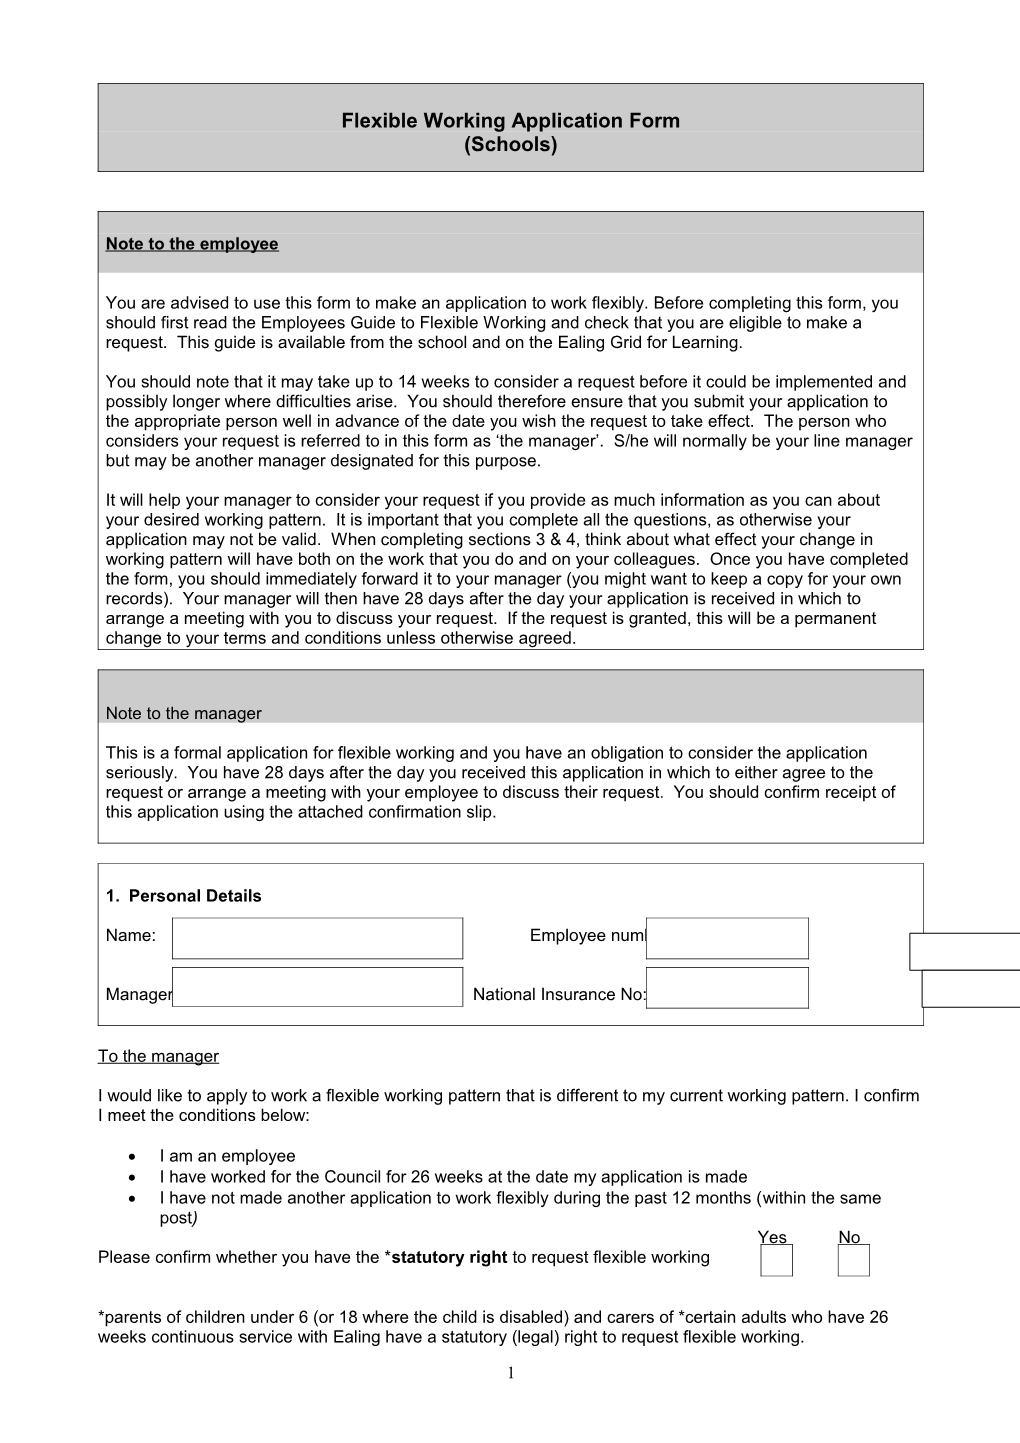 Flexible Working Application Form s1